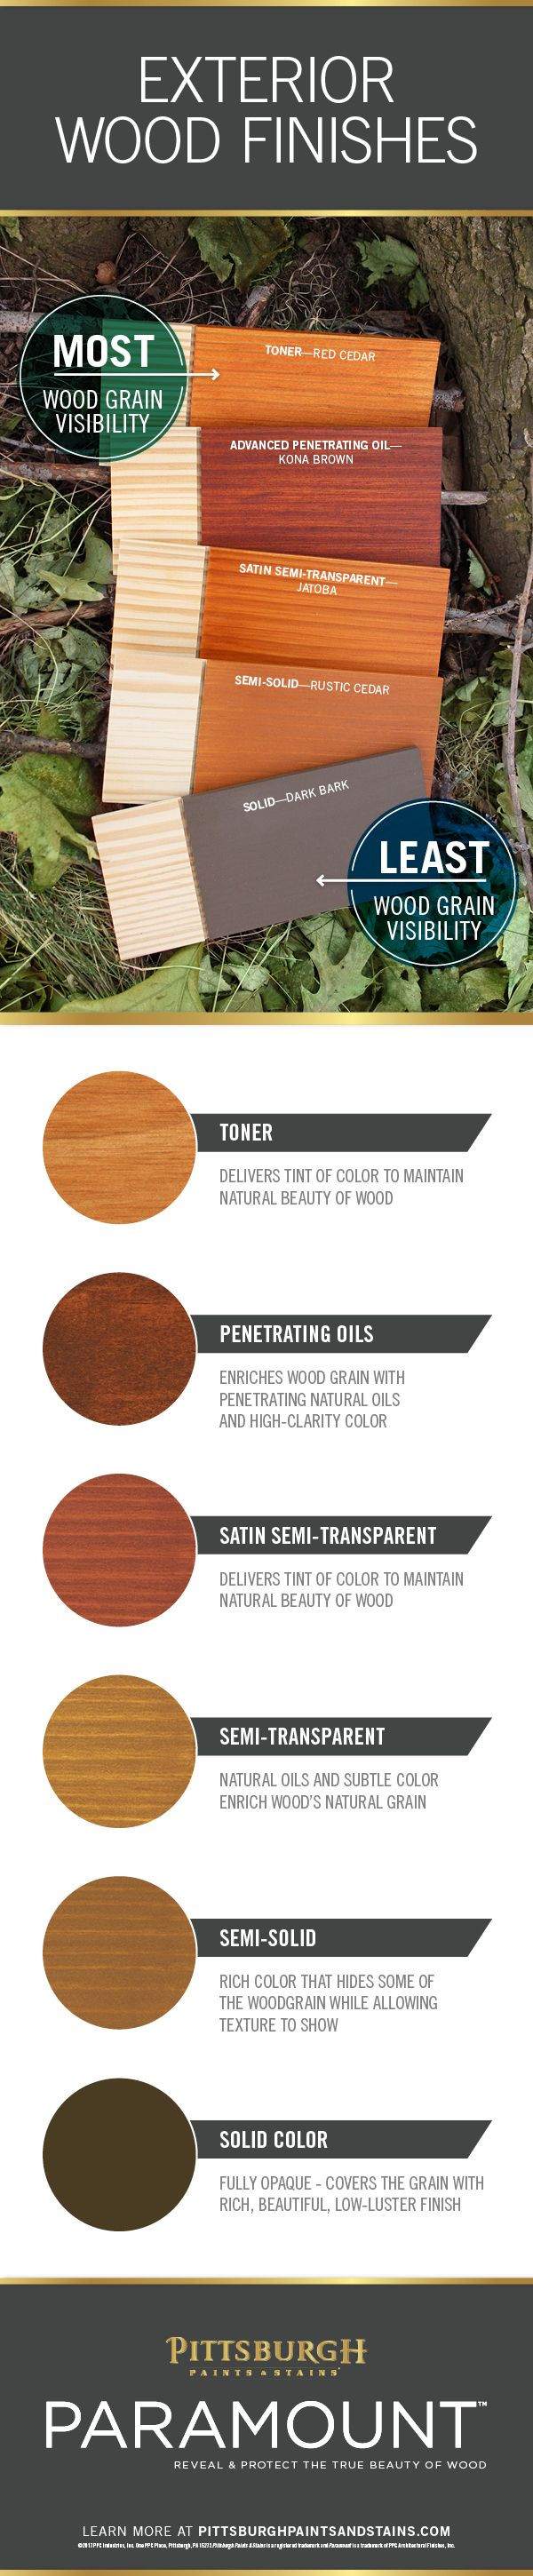 23 Great Hardwood Floor Refinishing Pittsburgh Pa 2024 free download hardwood floor refinishing pittsburgh pa of 677 best diy images on pinterest diy room decor crafts and regarding from a natural wood look to a beautiful semi transparent or solid color stain